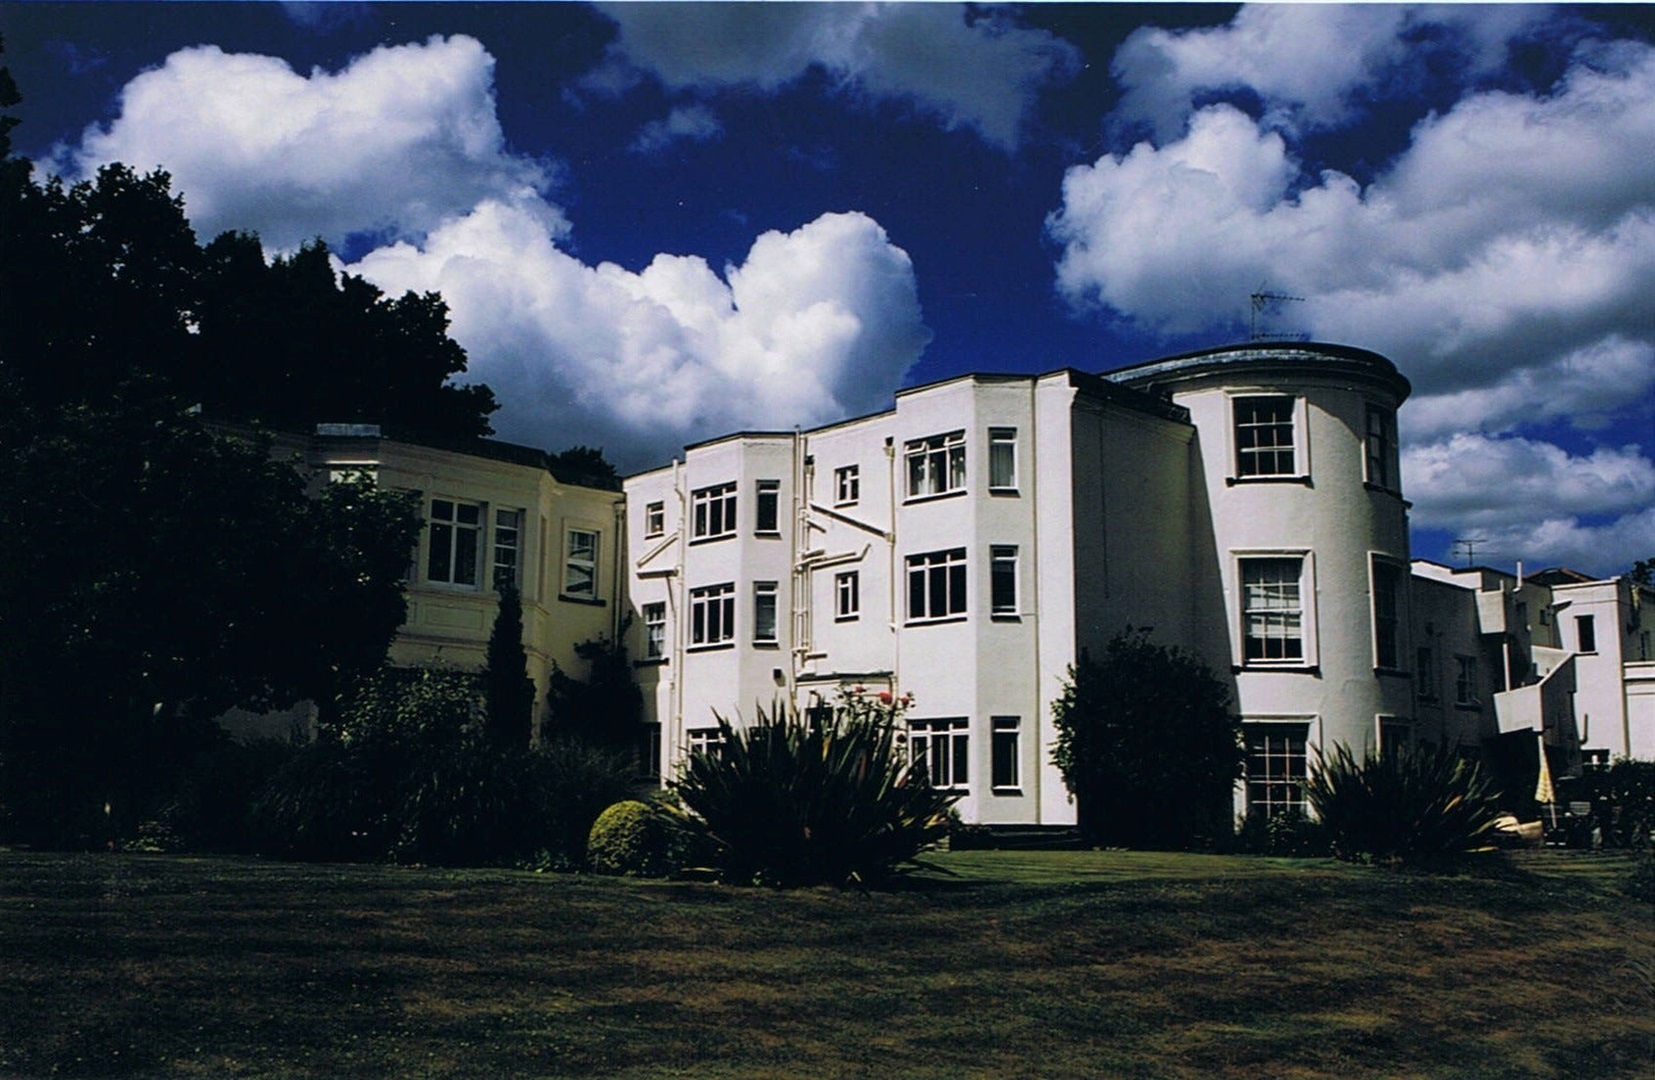 The Wentworth Estate, which Watford owned. Rodolph at English Wikipedia/Wikimedia Commons.